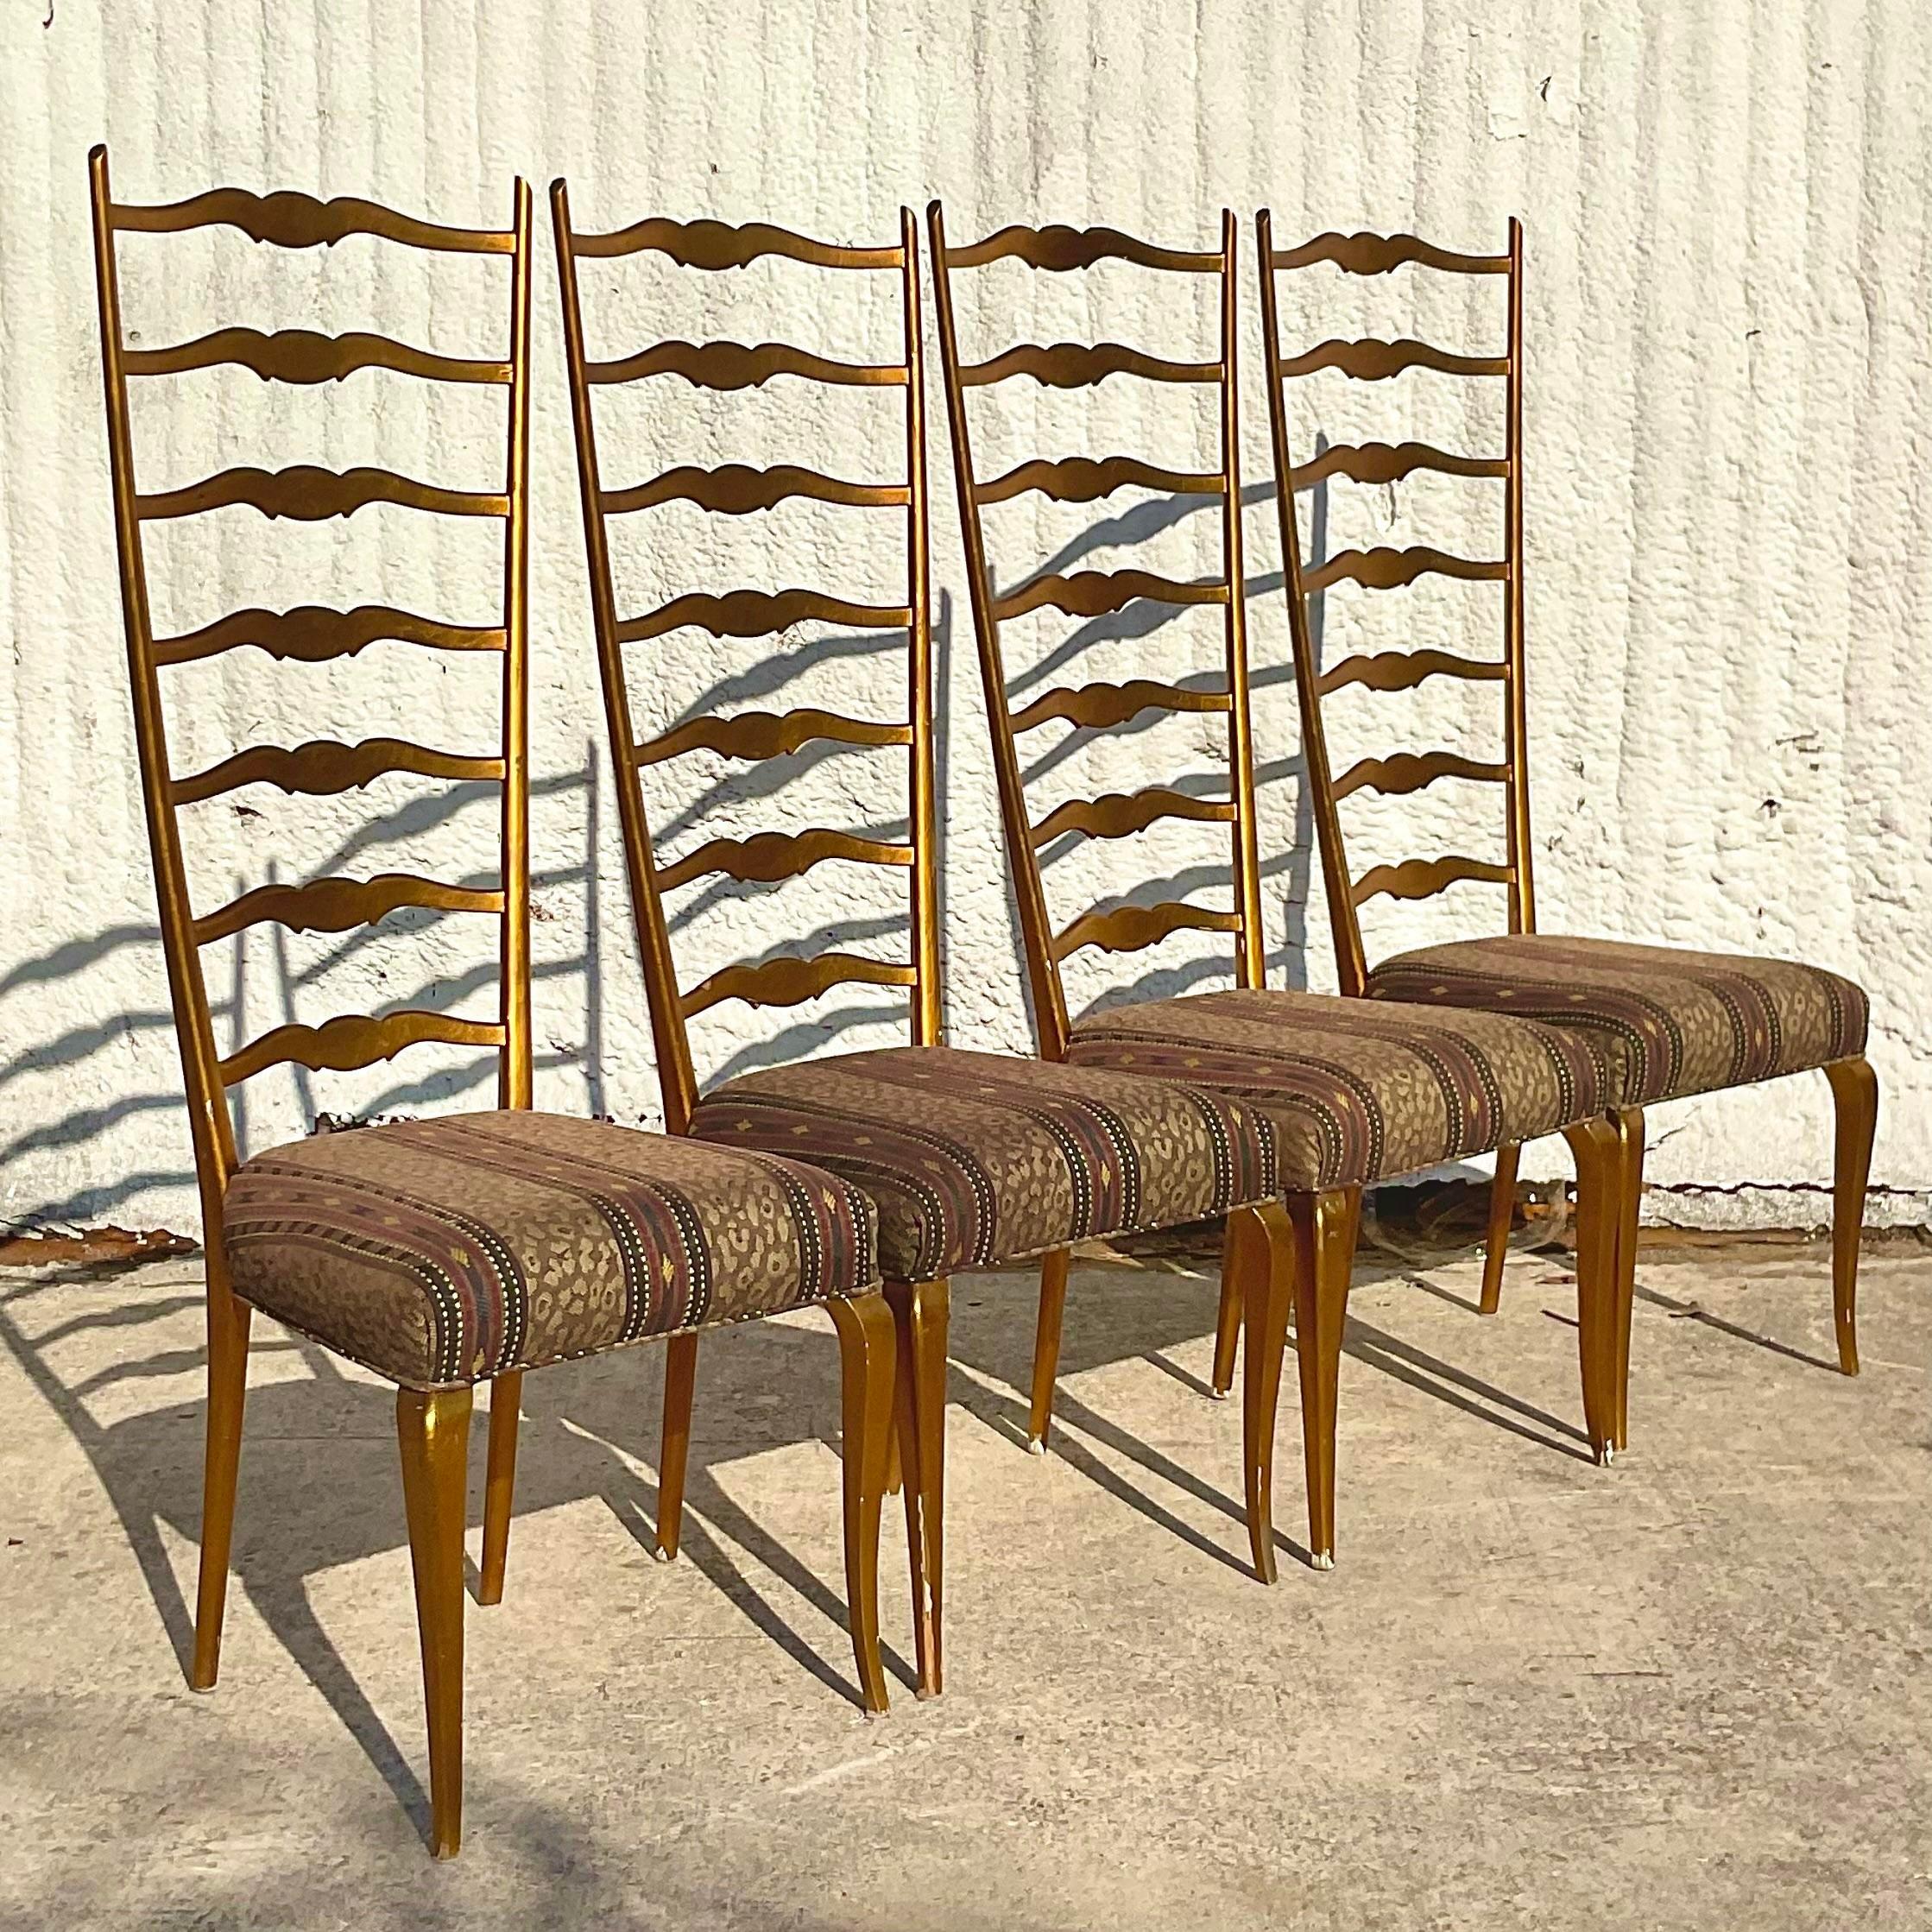 An exceptional set of four vintage Regency Italian dining chair. Beautiful gilt finish on a chic ladder back design. A tall and impressive profile. Acquired from a Palm Beach estate.